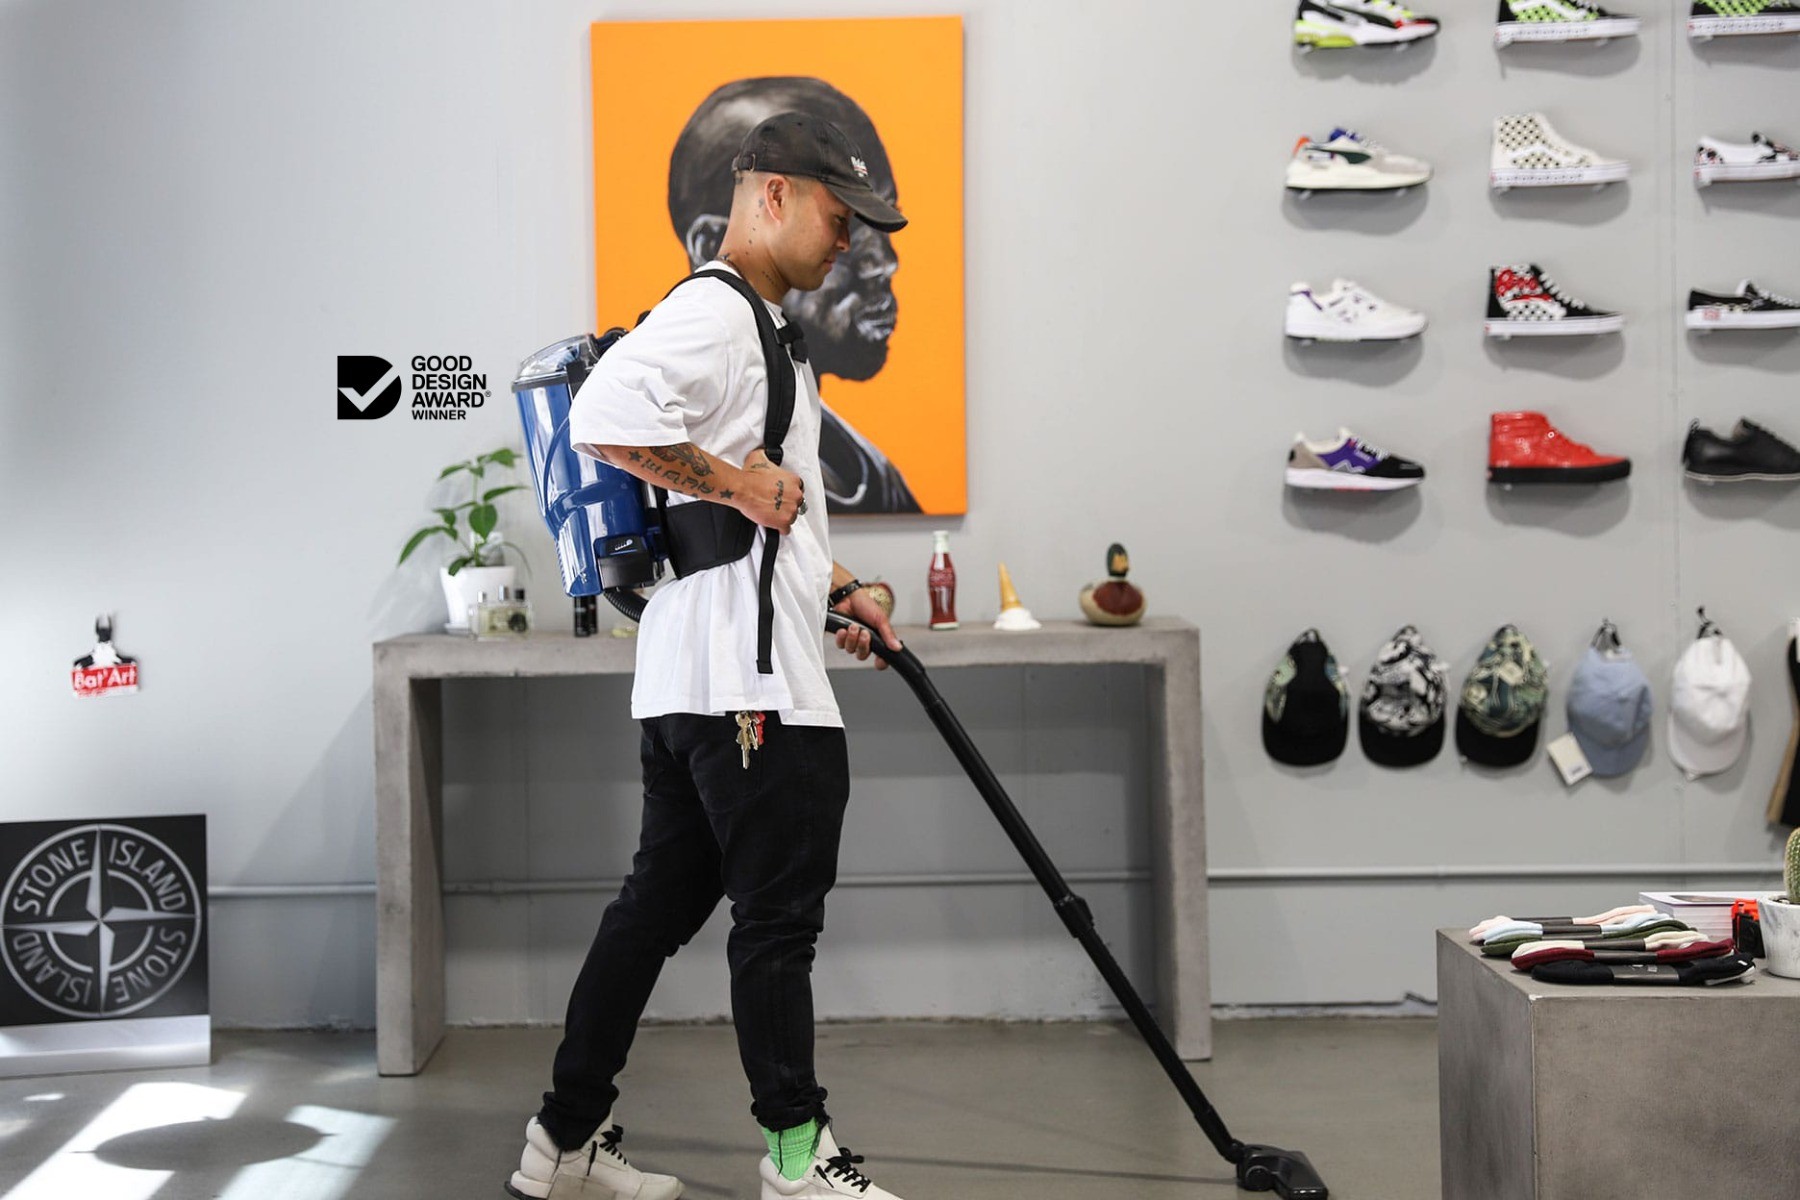 Man vacuuming the floor of Cabinet Noir, a designer streetwear clothing store, with a Velo battery powered vacuum, between clothing racks.